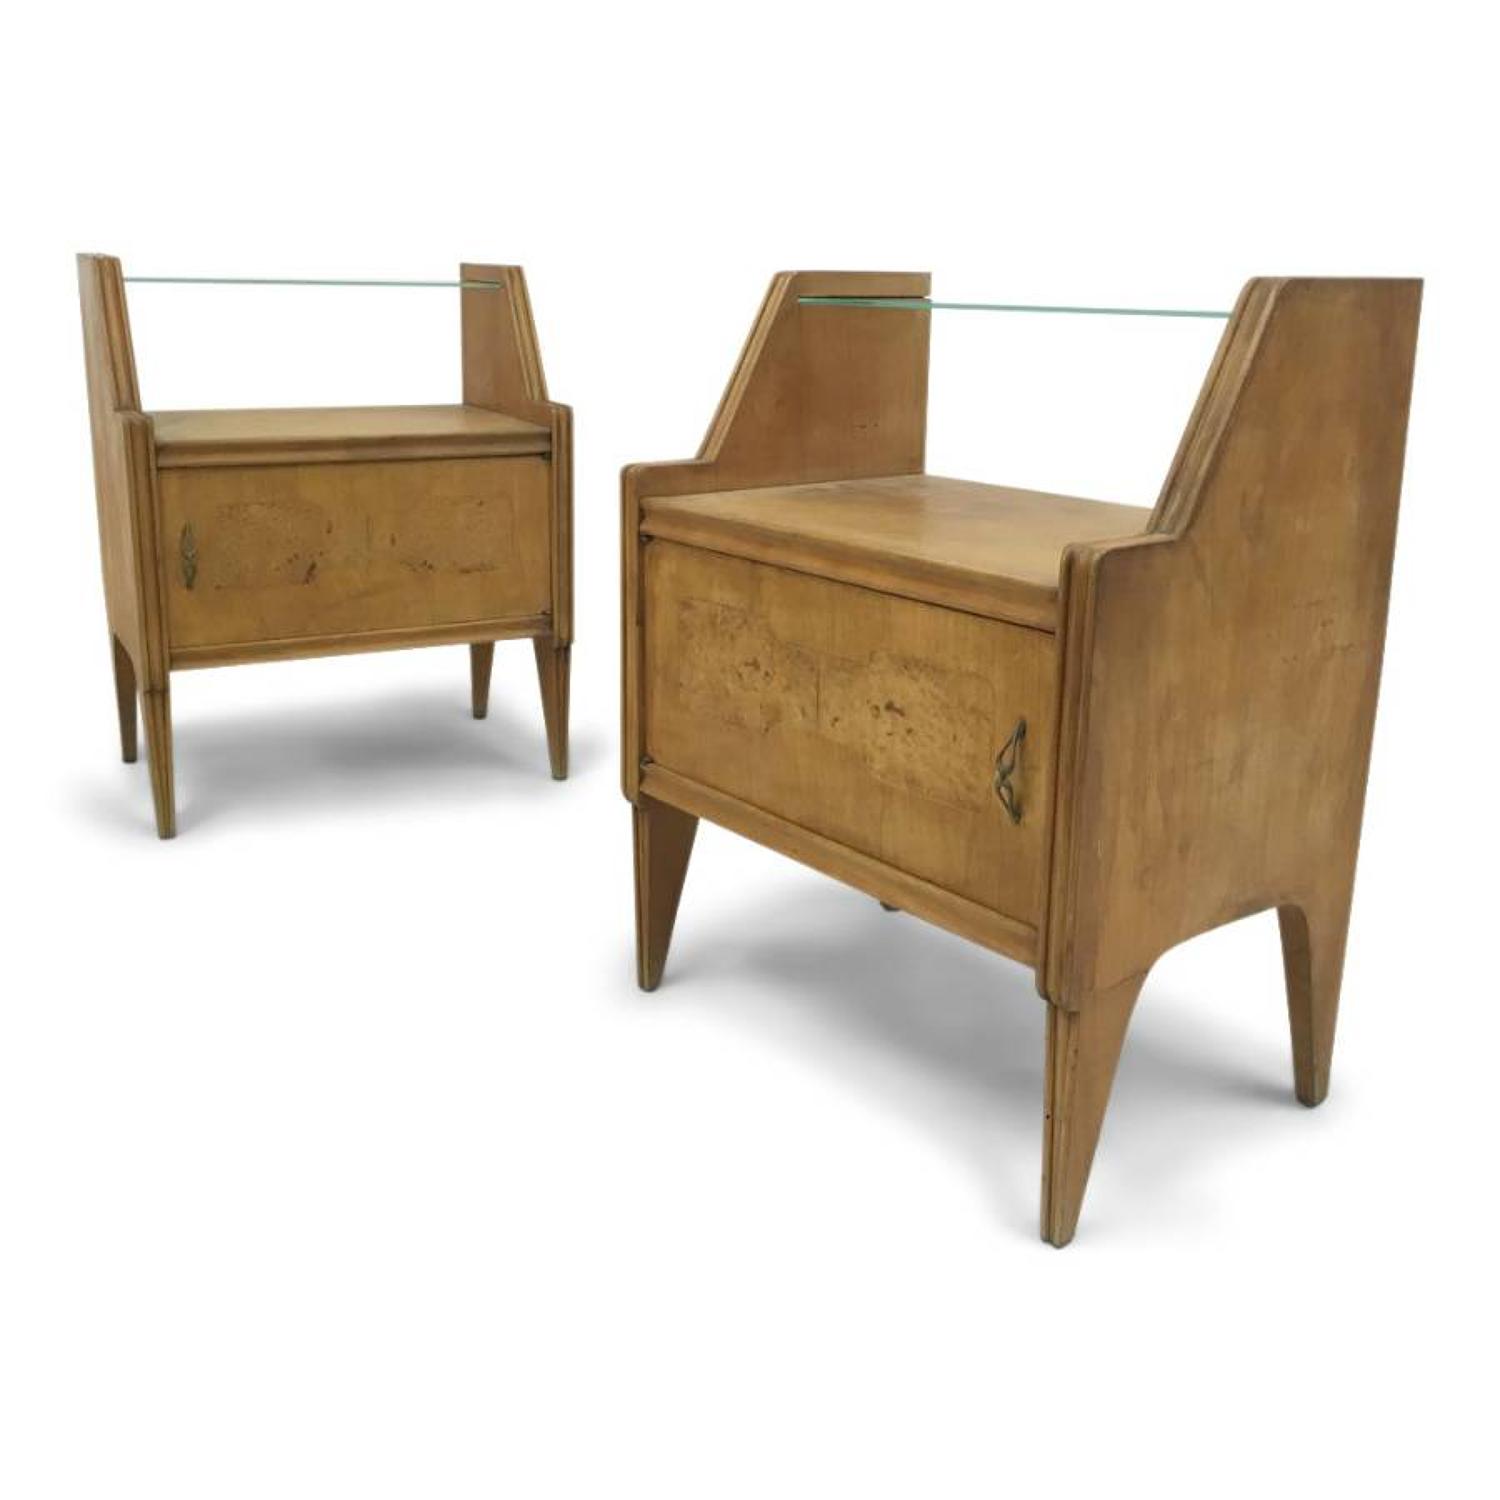 A pair of 1950s Italian bedside tables